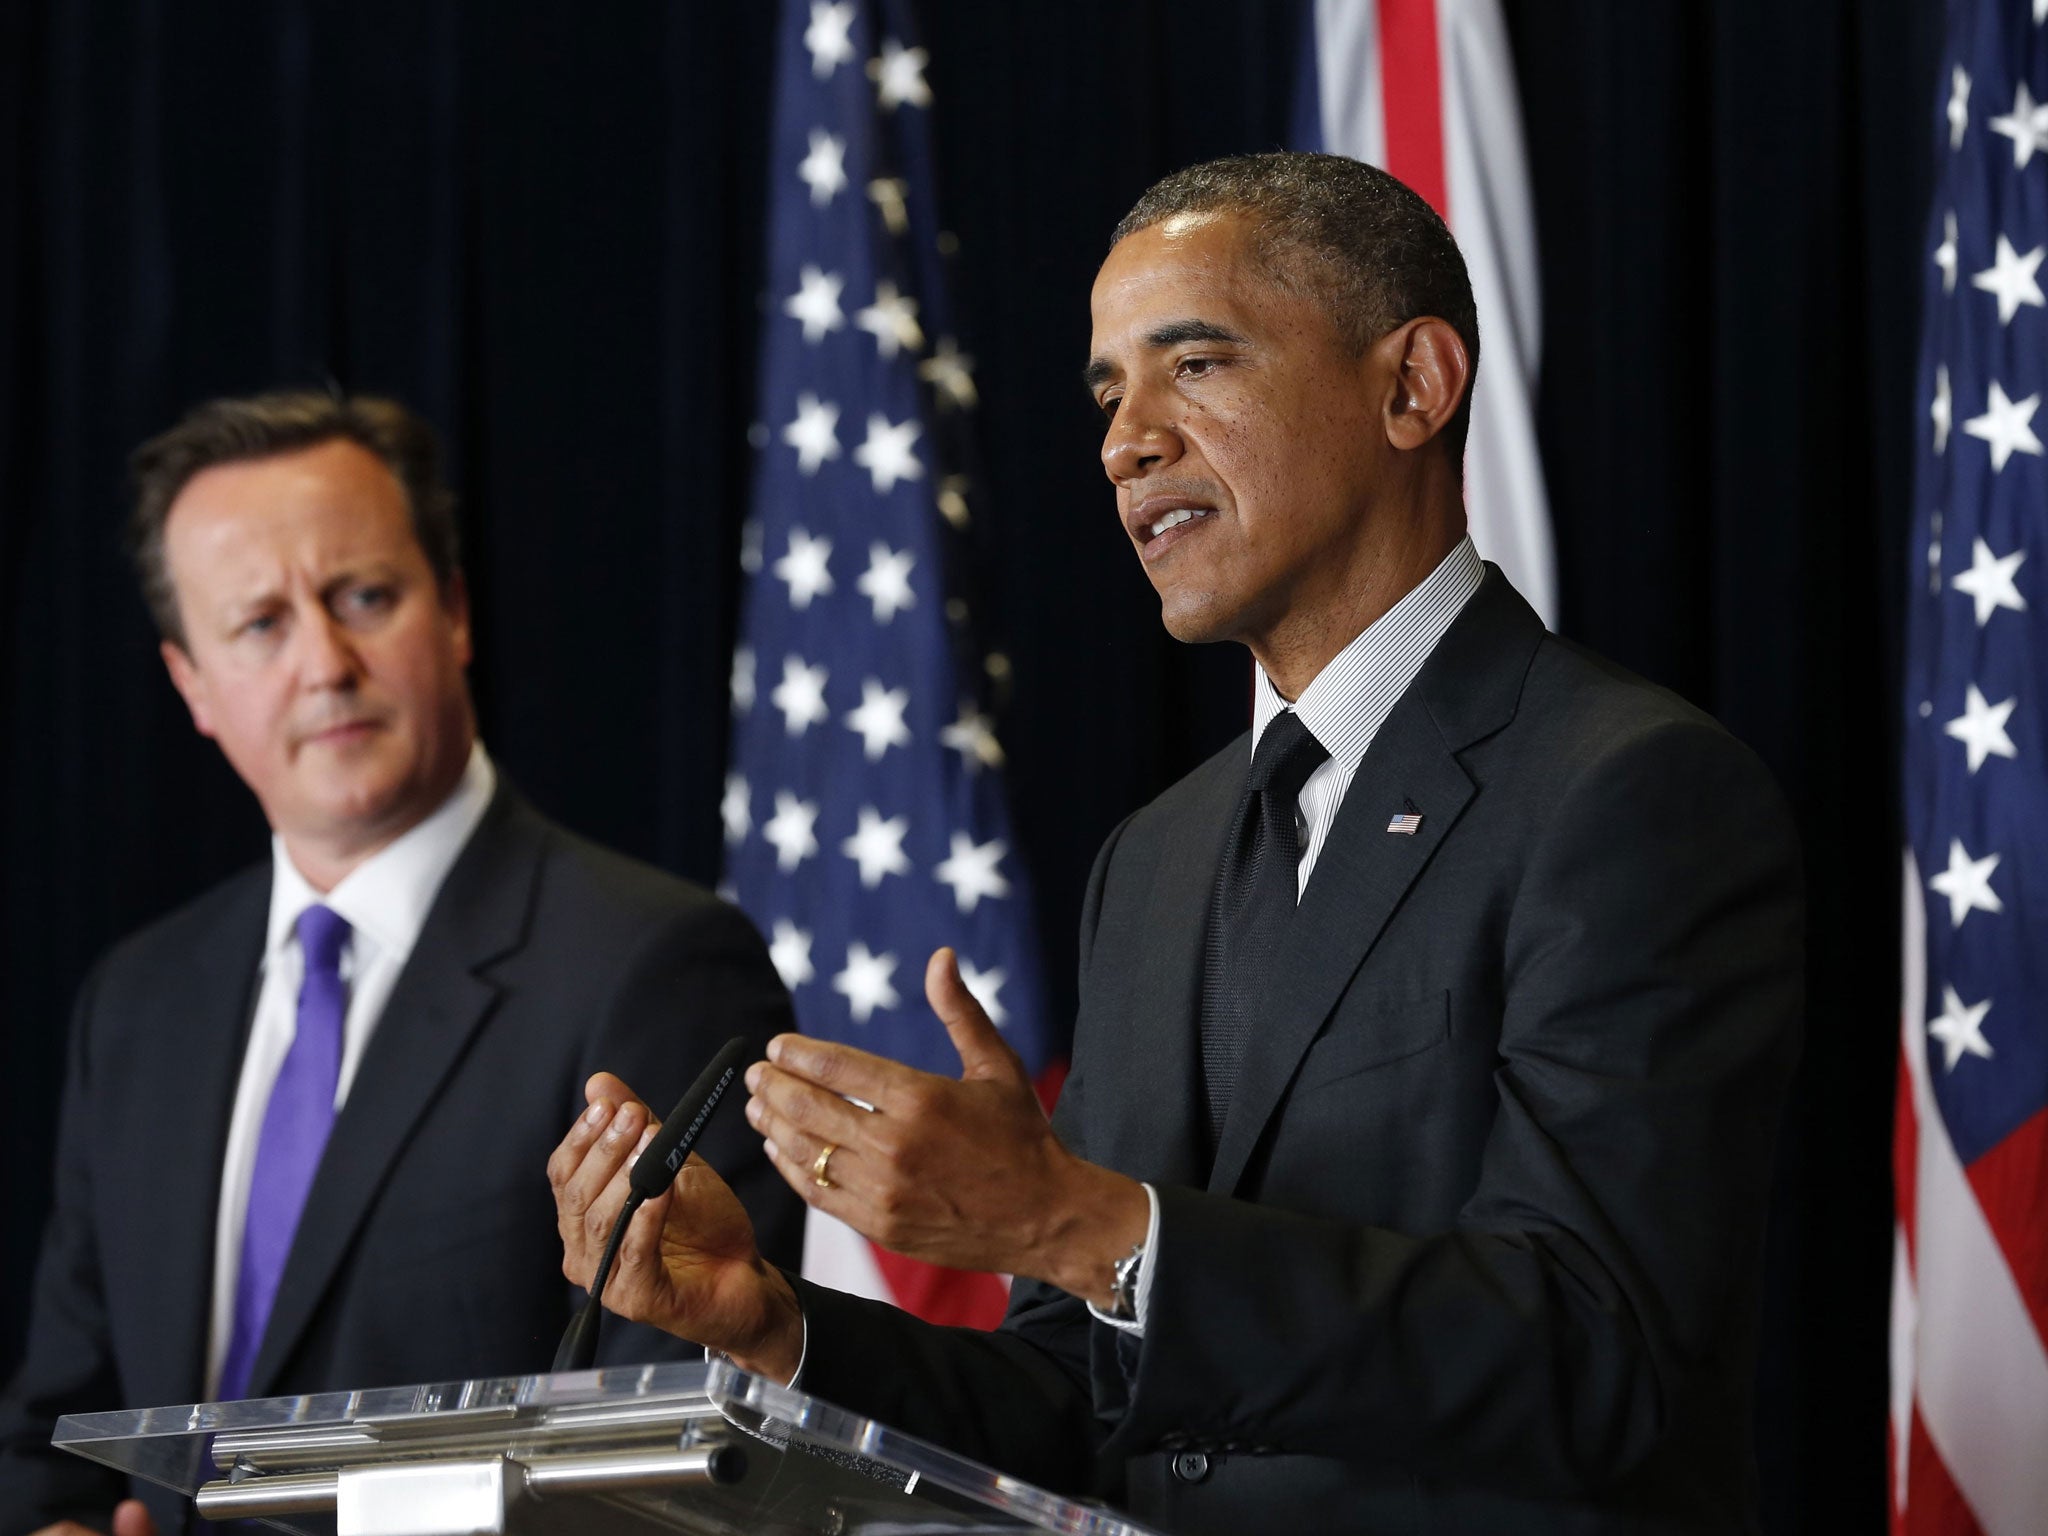 US President Barack Obama speaks next to David Cameron at a joint news conference after their meeting at the G7 summit in Brussels